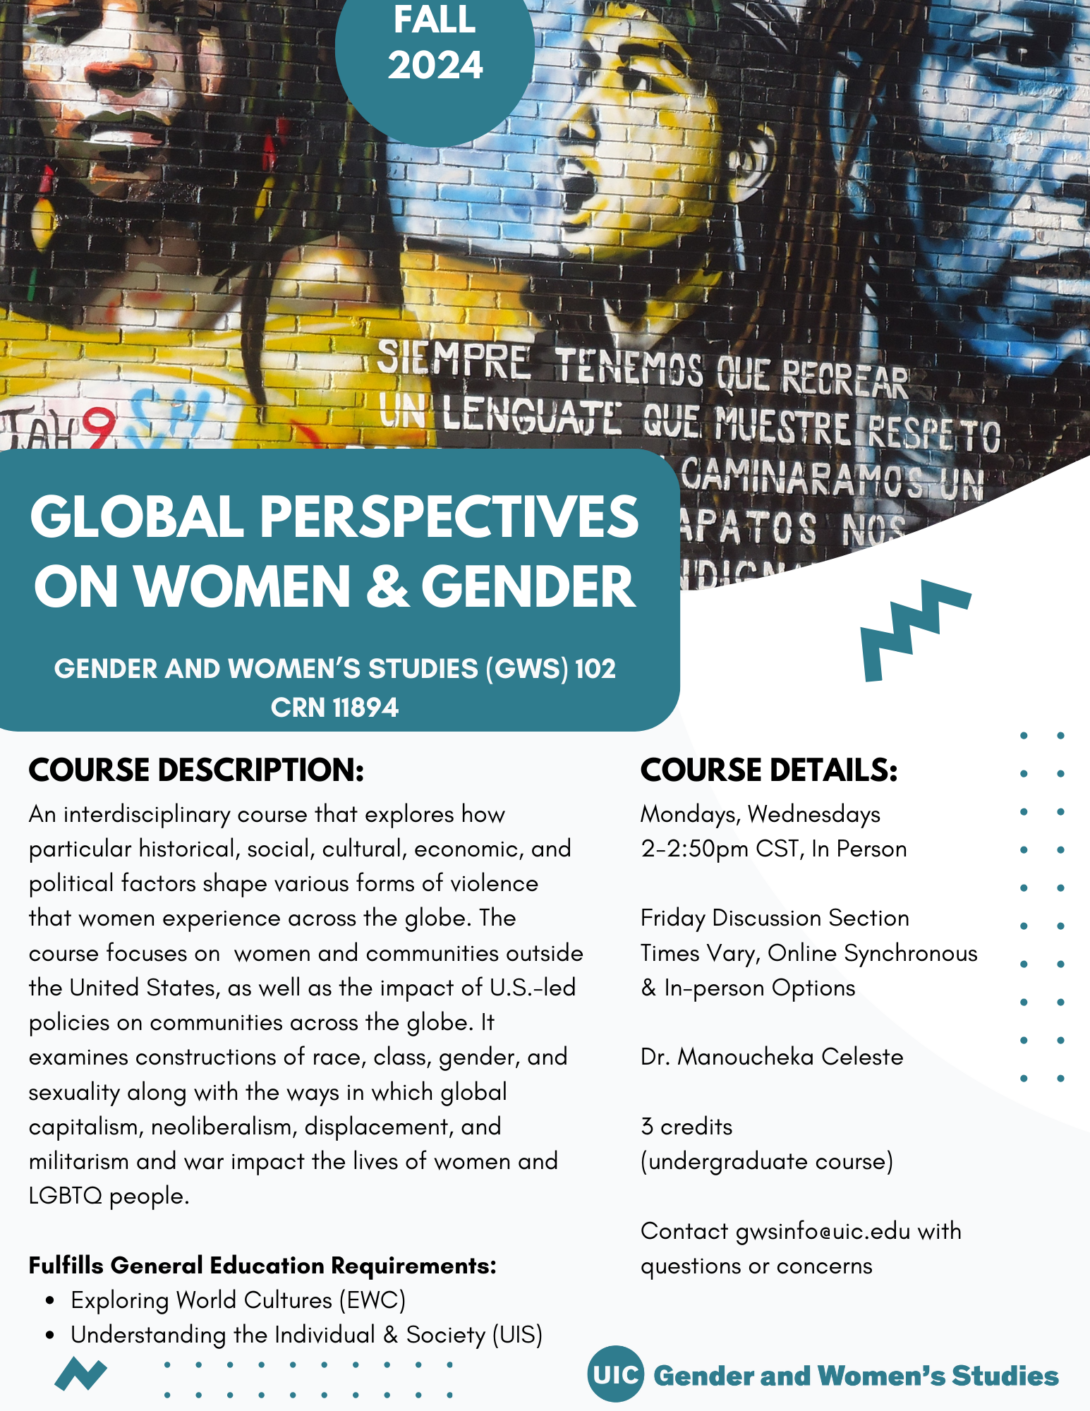 A flyer promoting the fall 2024 Global Perspectives on Women and Gender course. The top portion of the flyer includes a photo of a painted mural on a brick wall that features three women and a quote in Spanish. In the top middle is a teal circle with Fall 2024 inside it in white text. The bottom left portion of the photo is covered with a teal block that includes the course title in white text. Below that is the course description and course details in black text on a white background. A teal GWS logo appears in the bottom right of the flyer. Parallel lines of teal dots and teal geometric designs decorate the page.